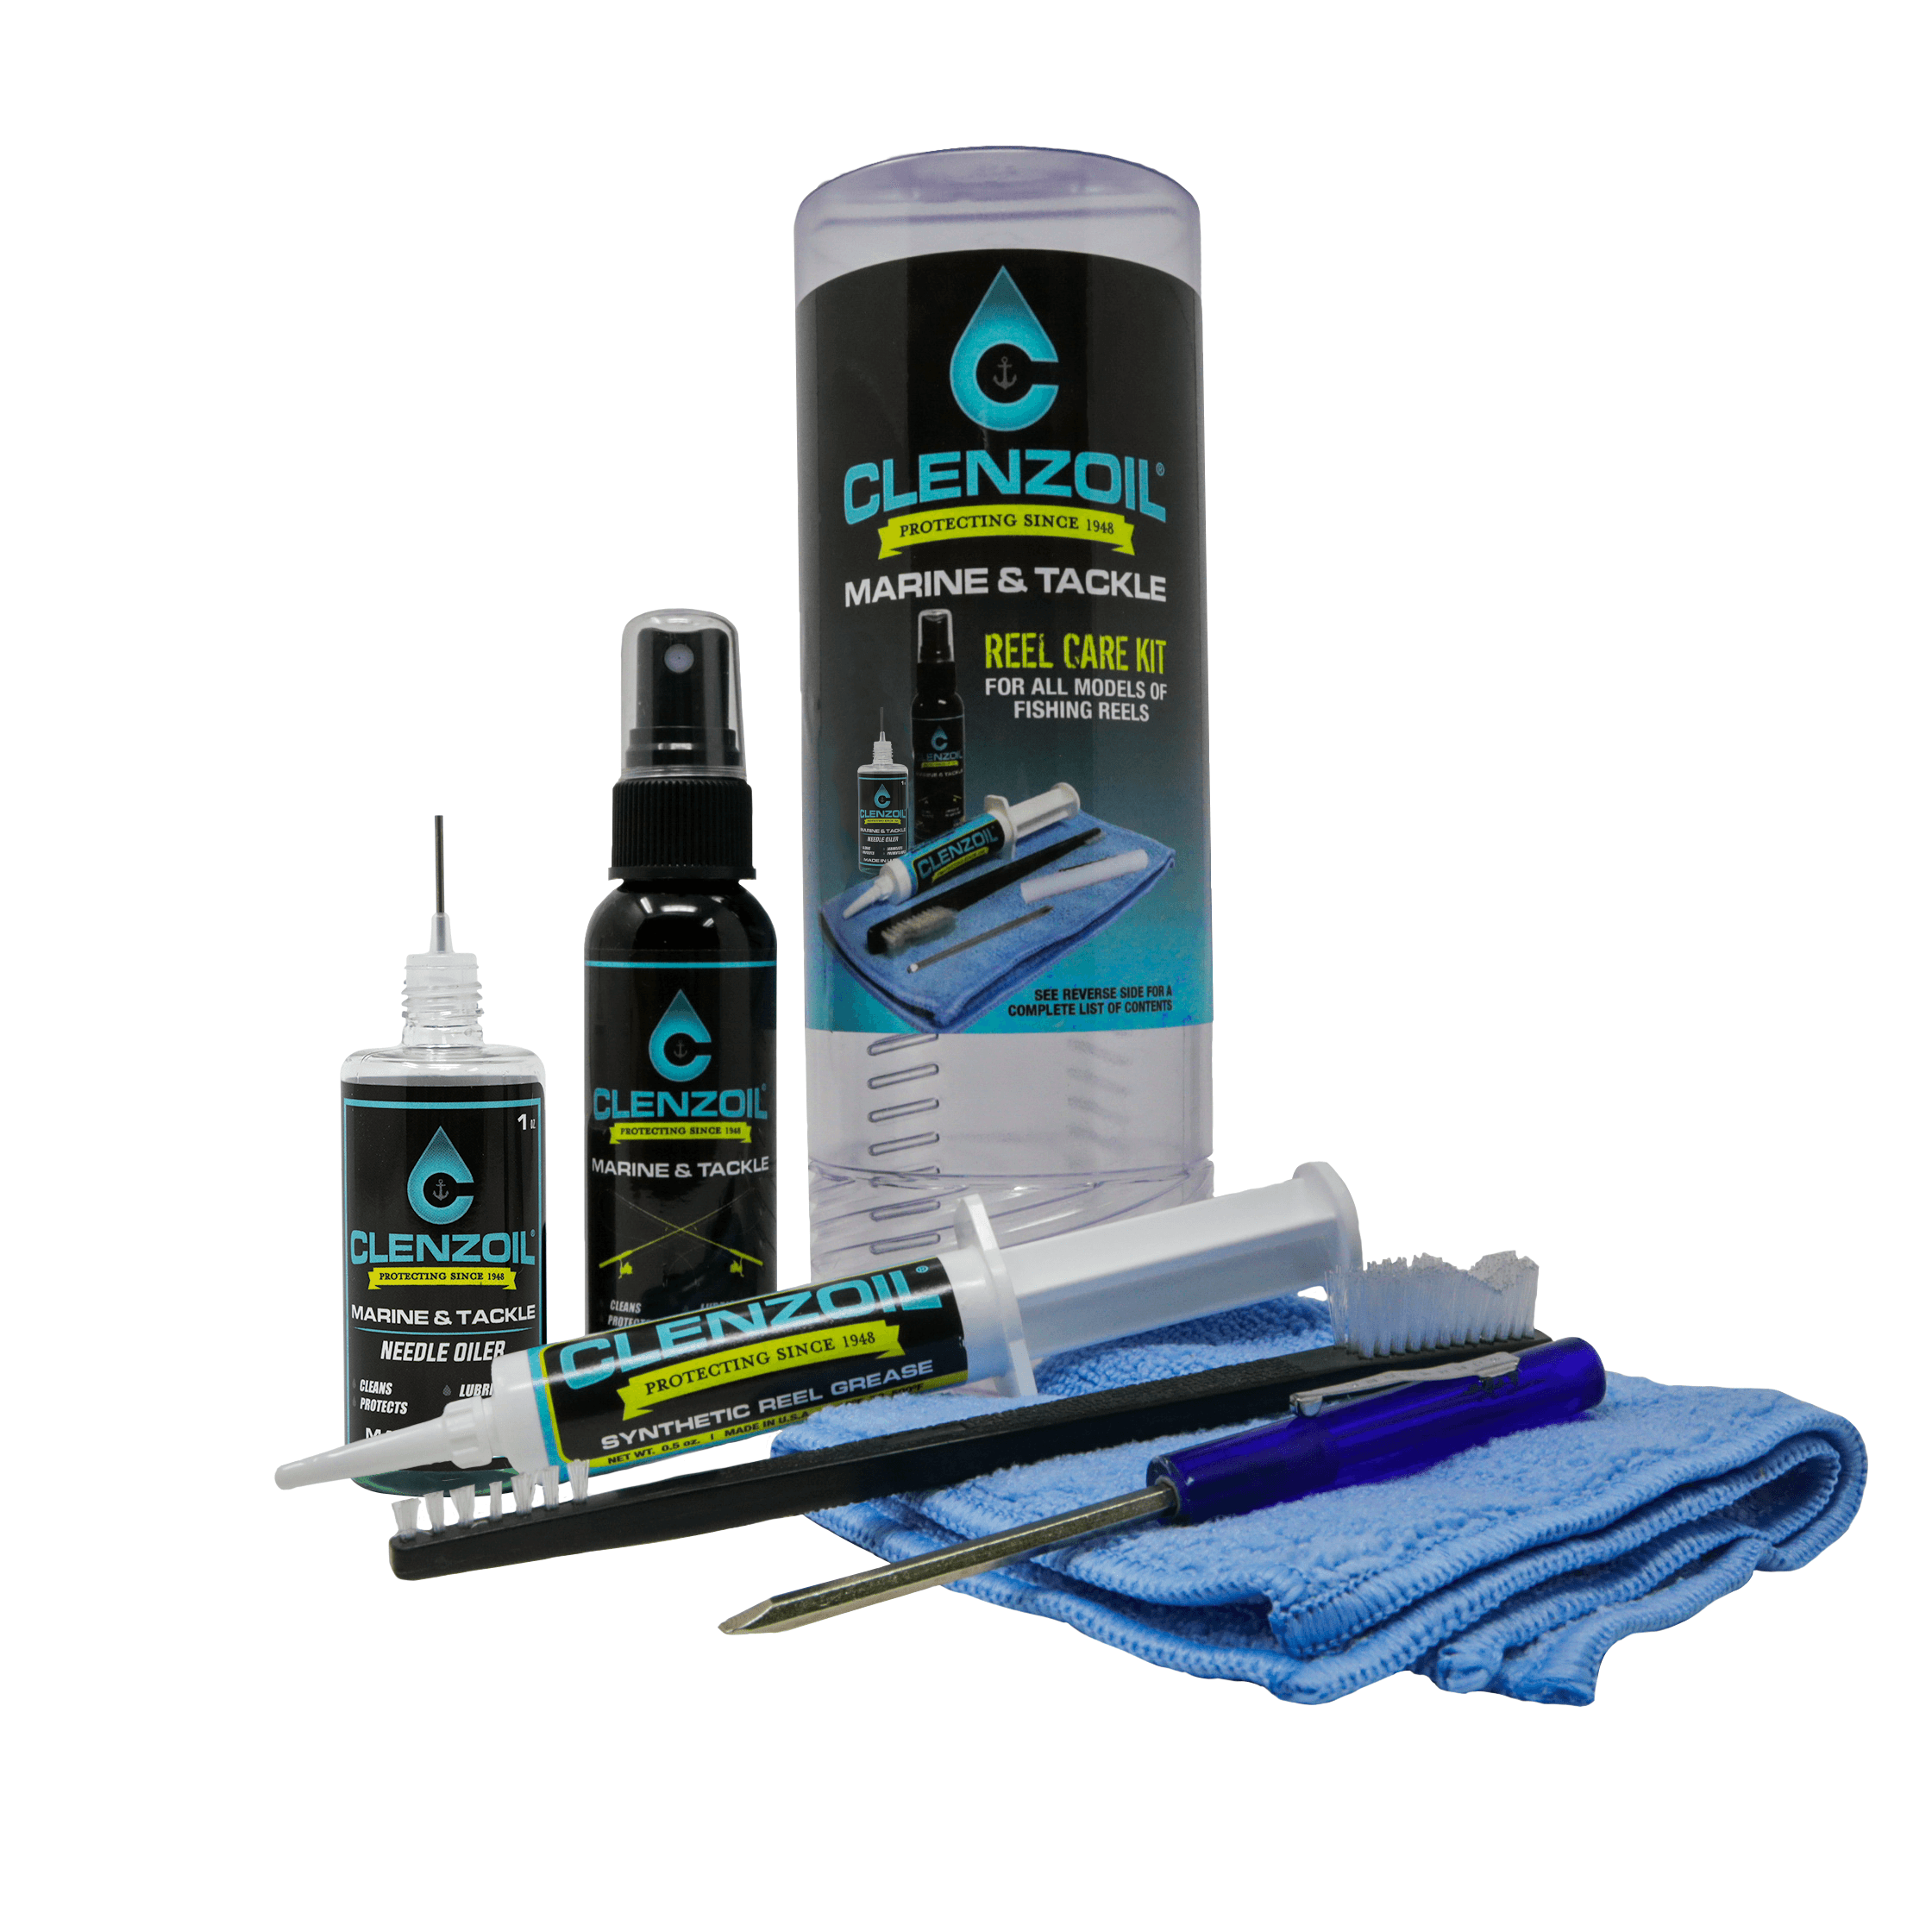 Marine & Tackle Reel Care Kit – Clenzoil